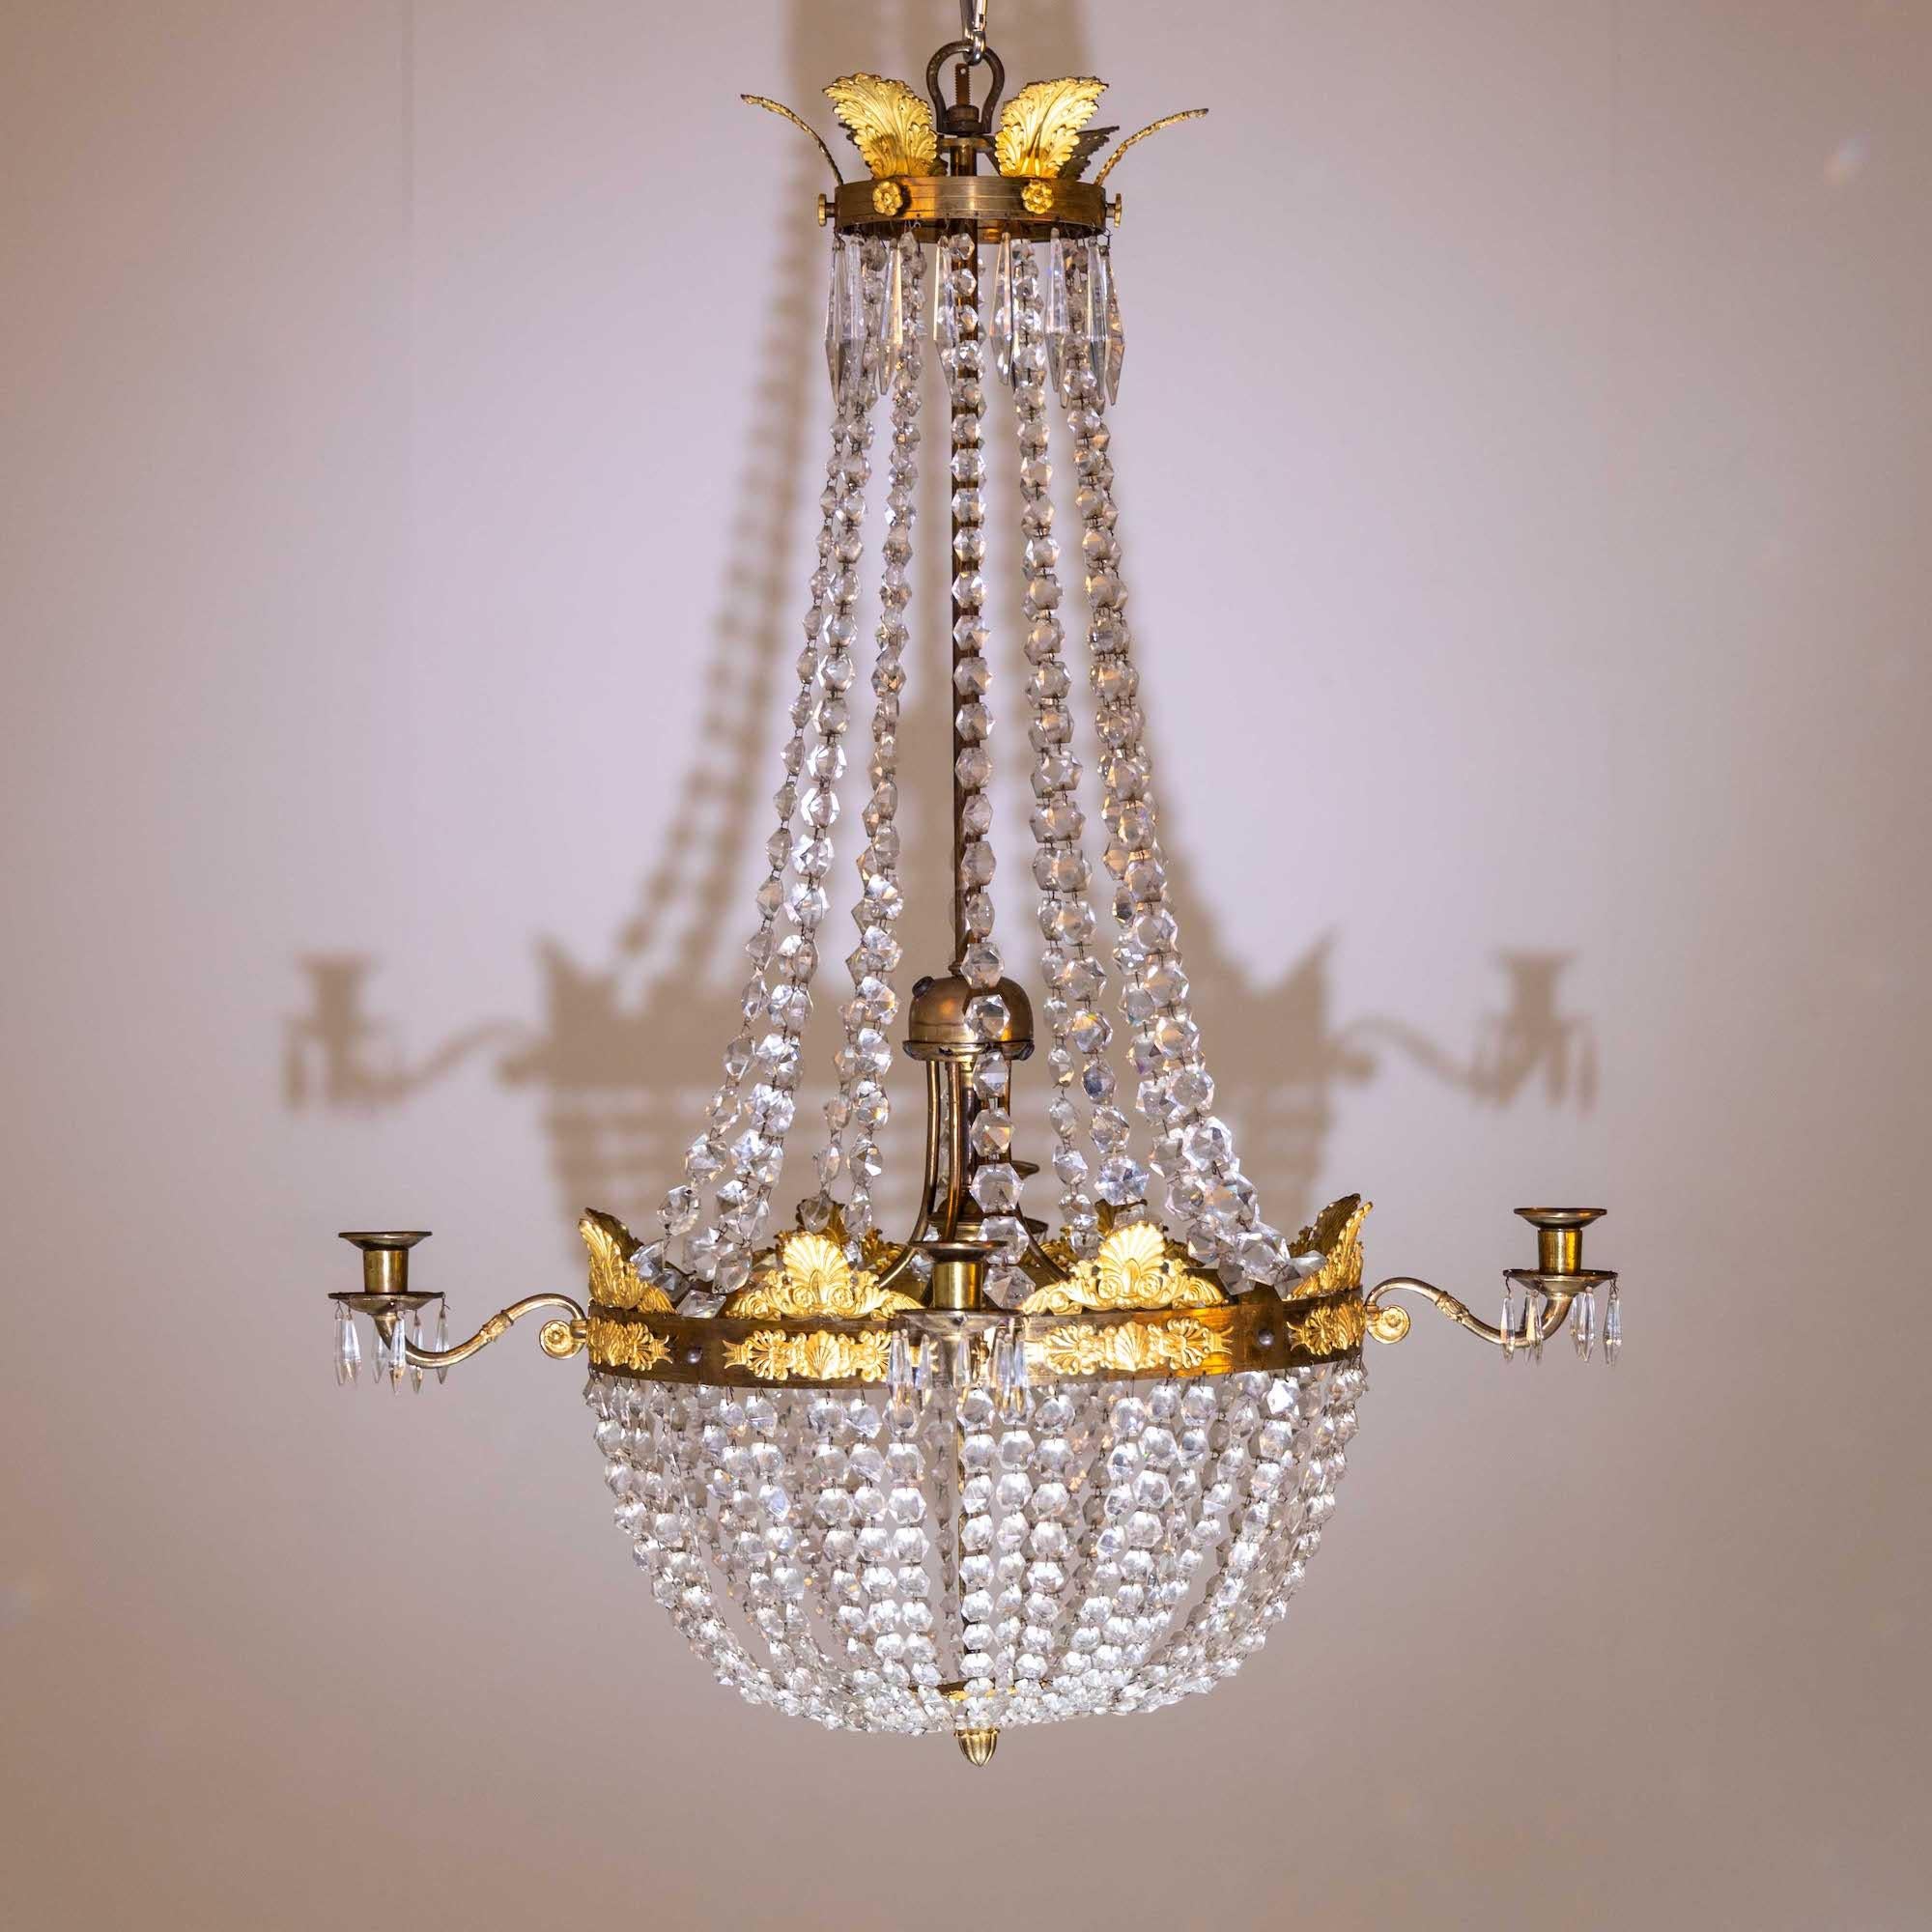 Mid-19th Century Chandelier with Crystals, France circa 1830 For Sale